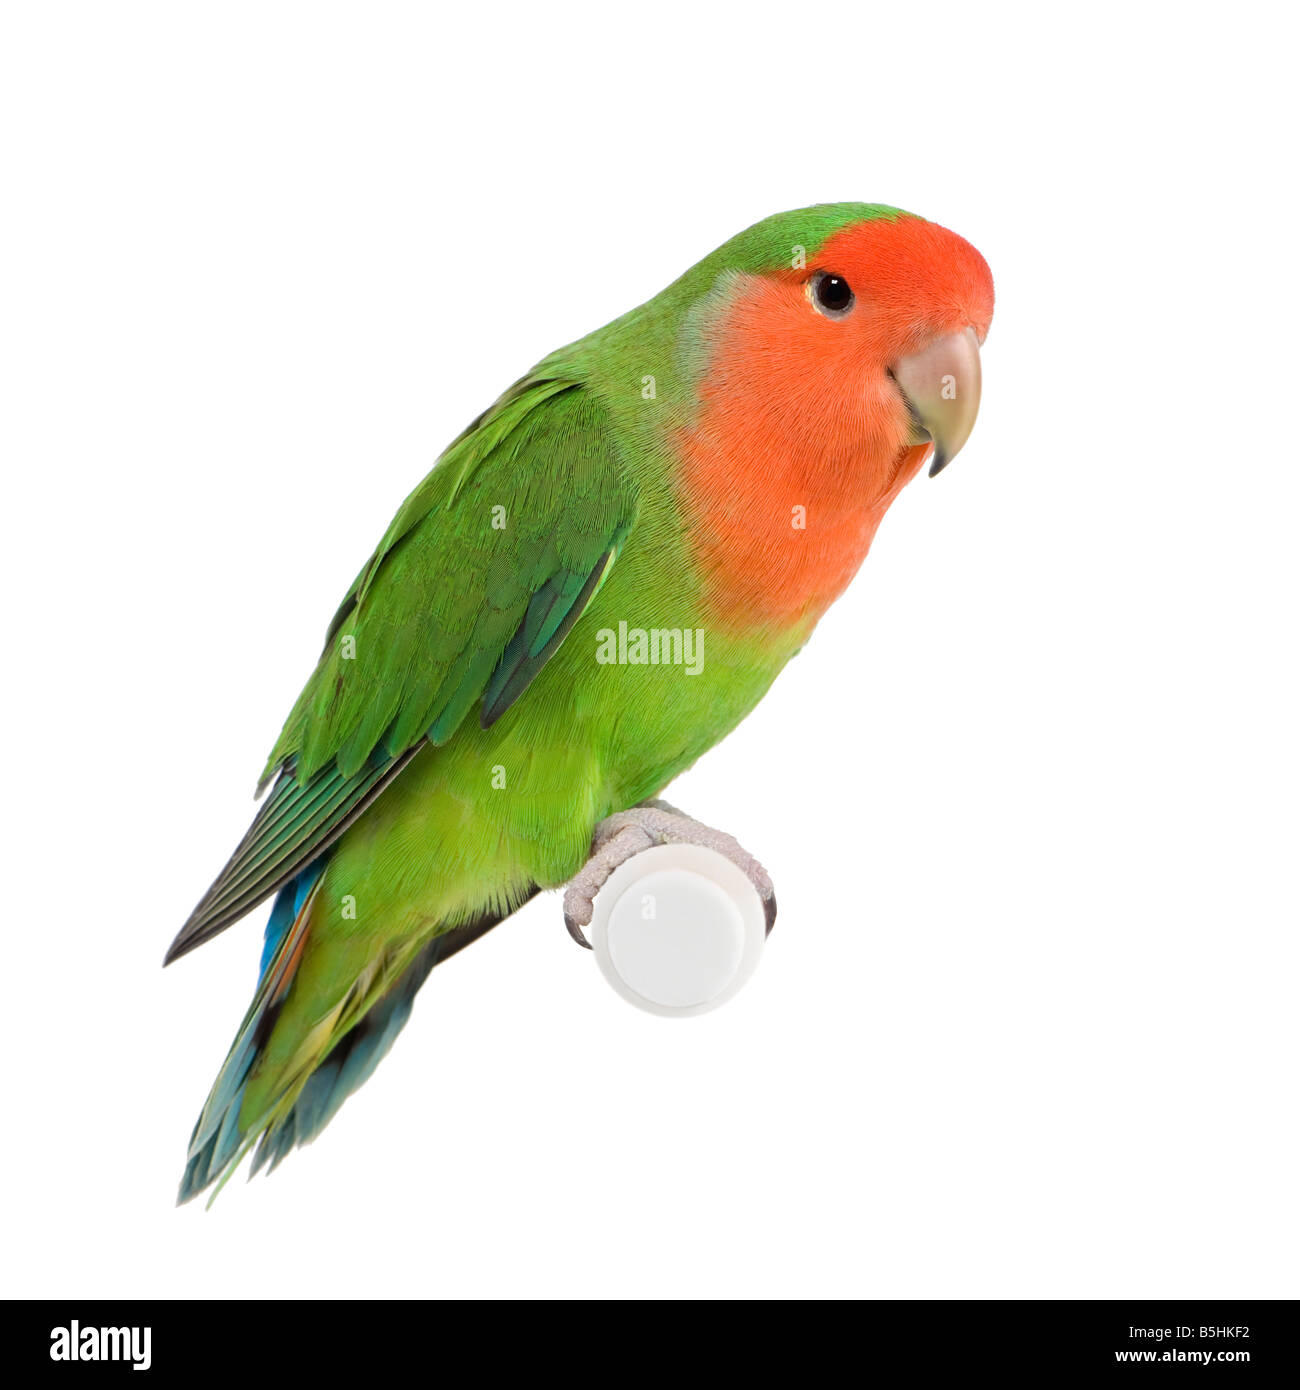 Peach-faced lovebird in front of a white background Stock Photo